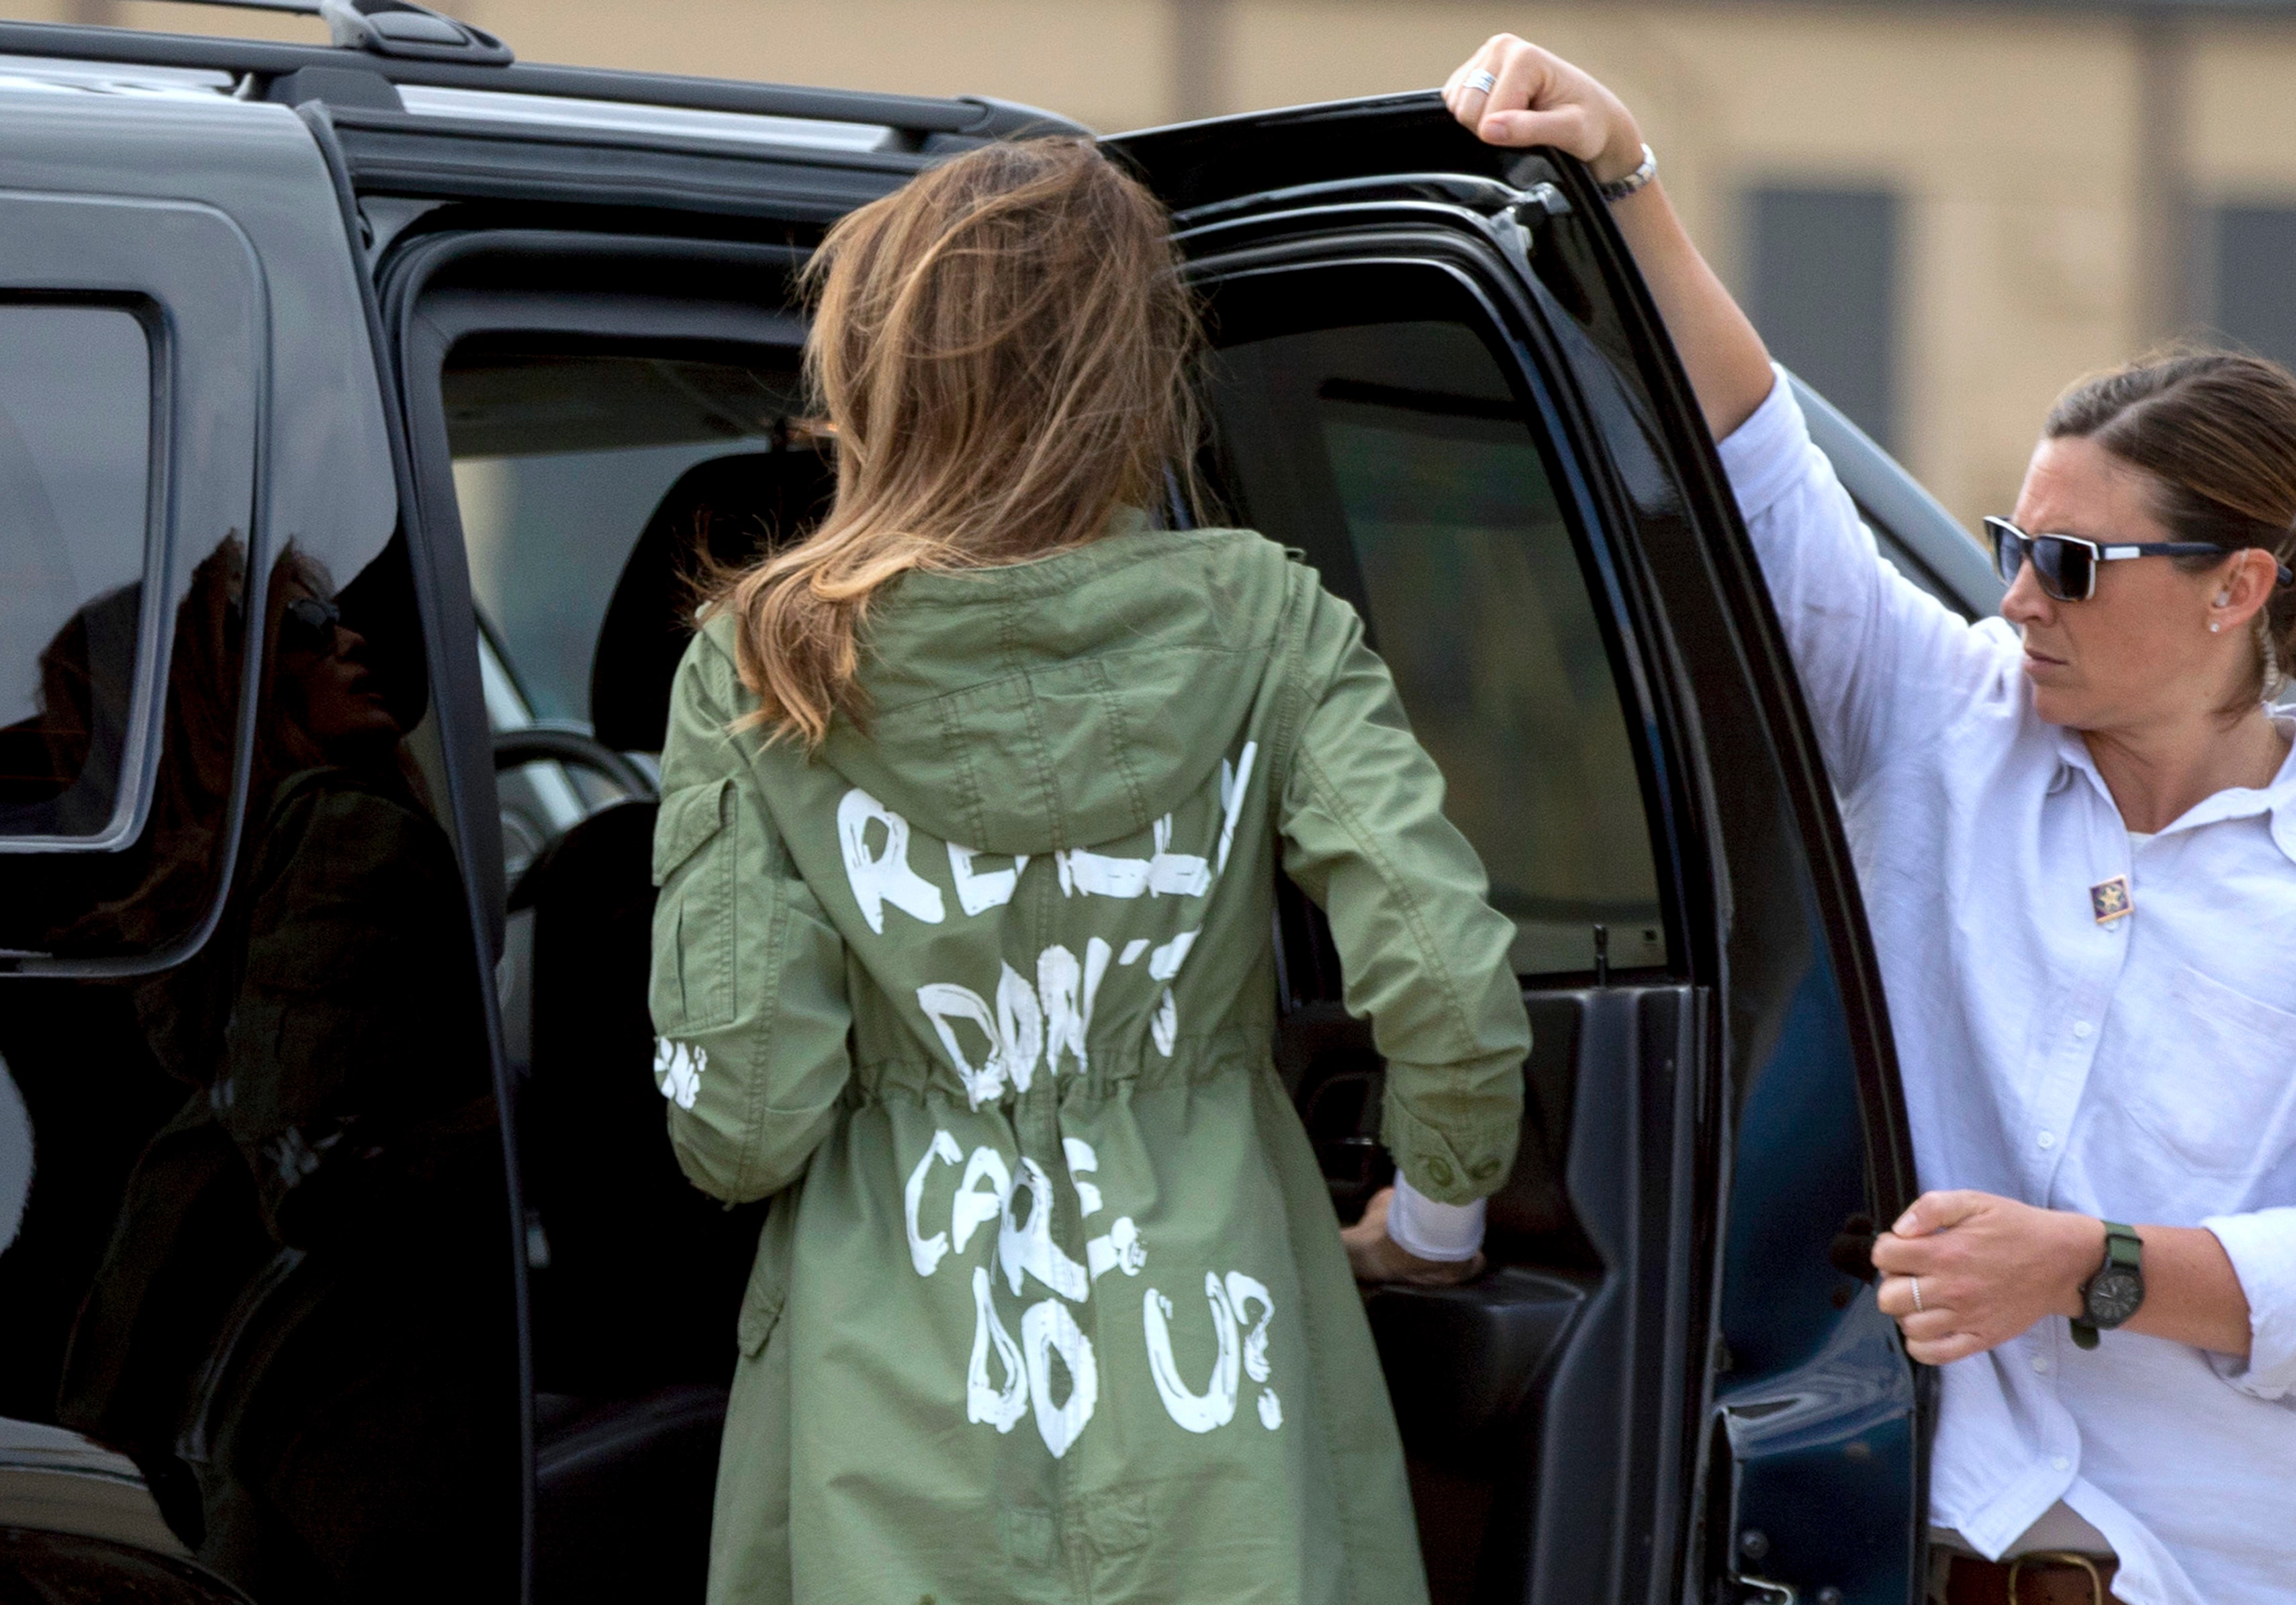 In this June 21, 2018 file photo, first lady Melania Trump arrives at Andrews Air Force Base, Md. wearing a Zara jacket that reads, "I don't really care. Do U?" after visiting the Upbring New Hope Children Center run by the Lutheran Social Services of the South in McAllen, Texas. (AP)